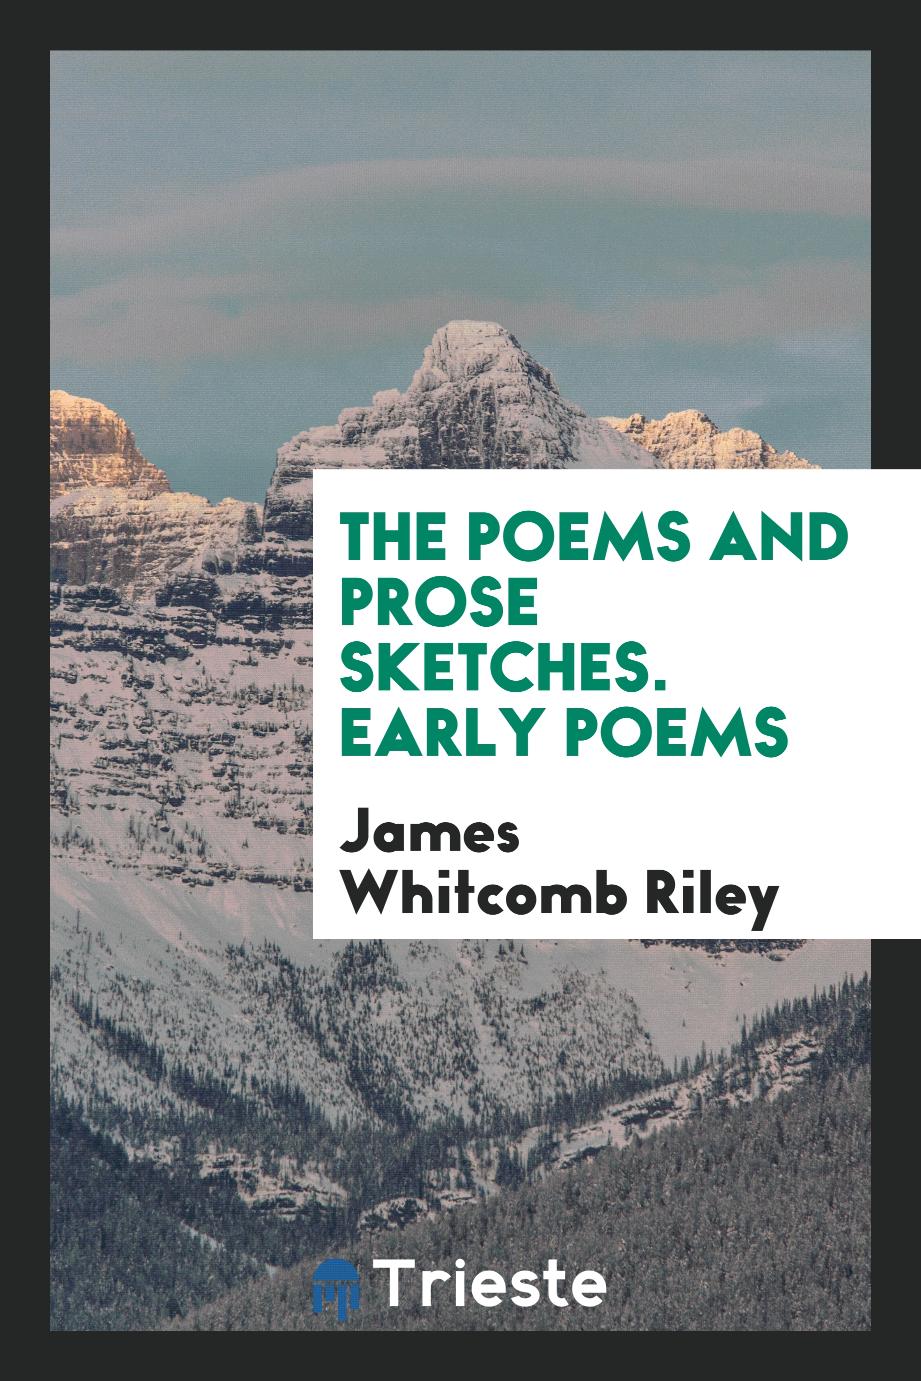 The poems and prose sketches. Early poems